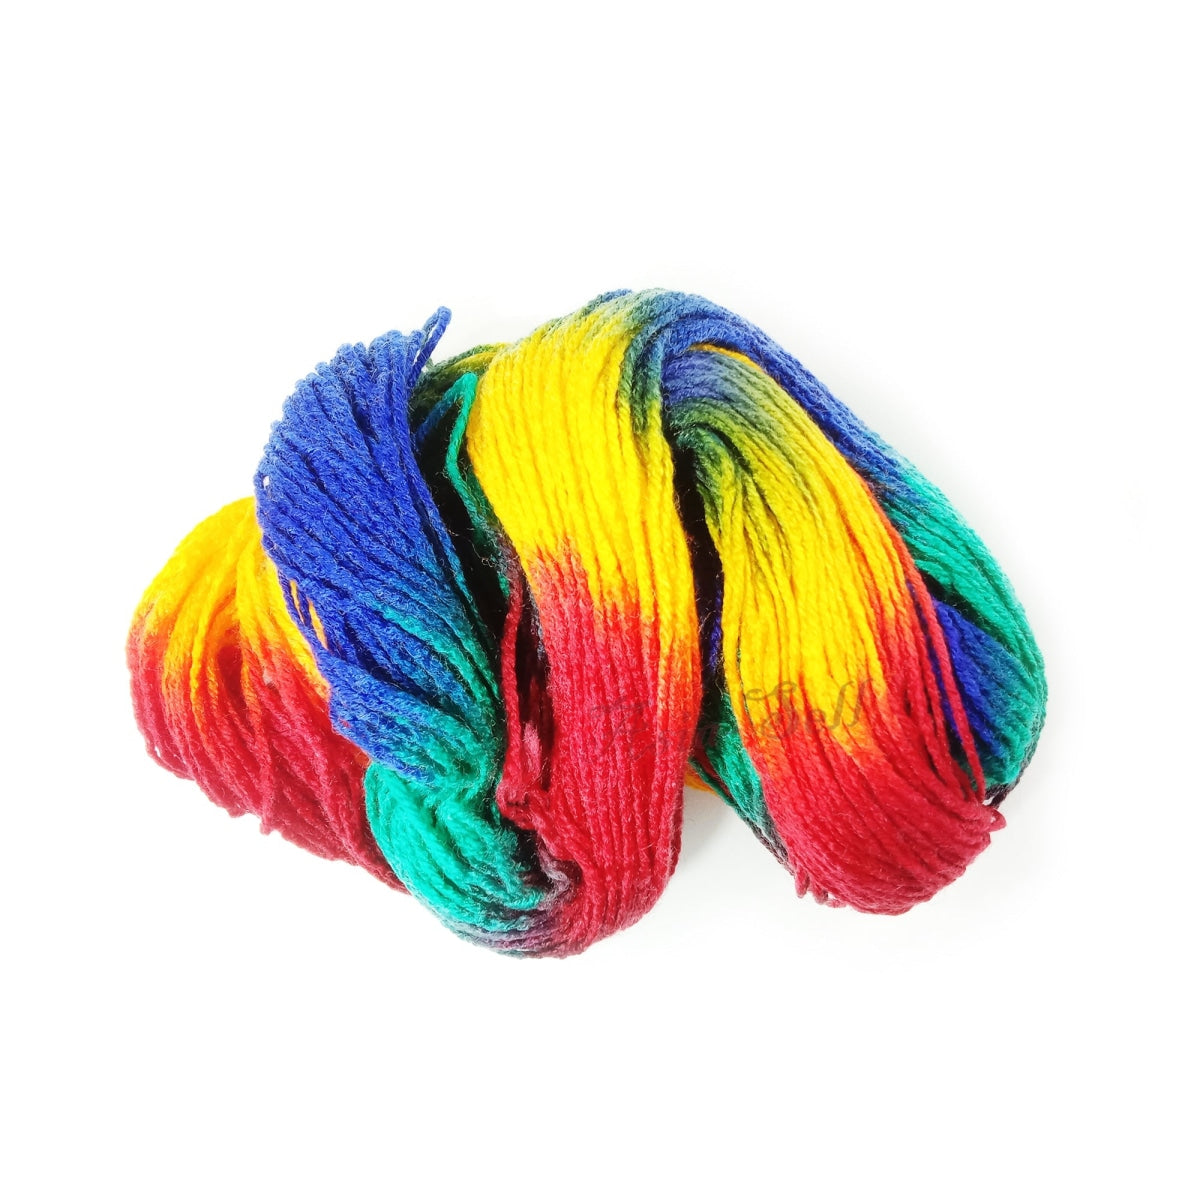 50G Ball Of Knitting Yarn Mixed Colourful Dyed Crochet Thread Multicoloured Craft 2 Clothing Buttons